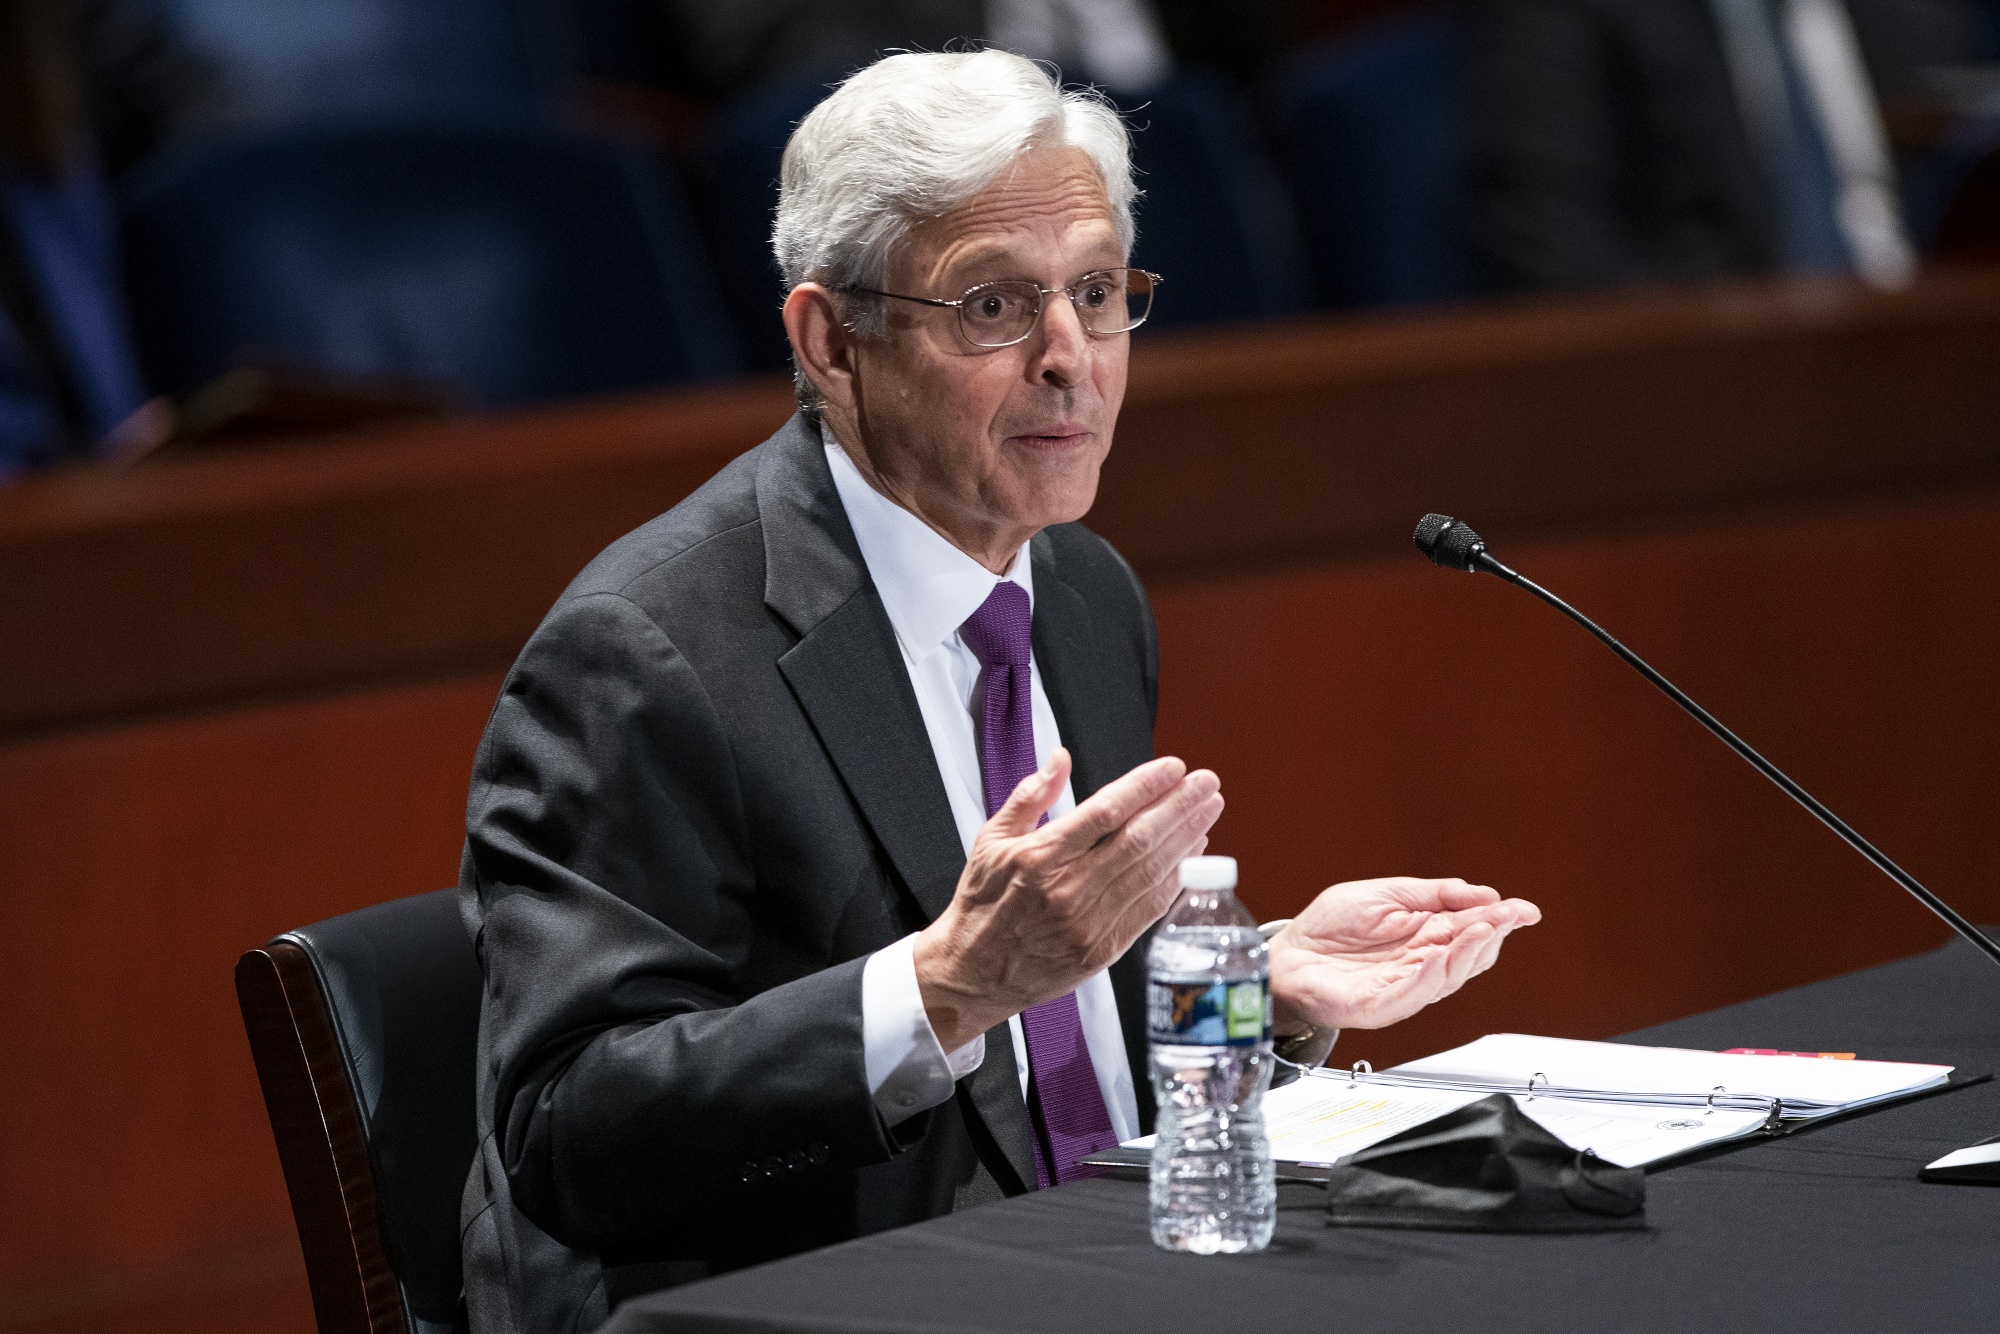 Merrick Garland speaks during a House Judiciary Committee hearing in Washington, D.C. on Oct. 21.